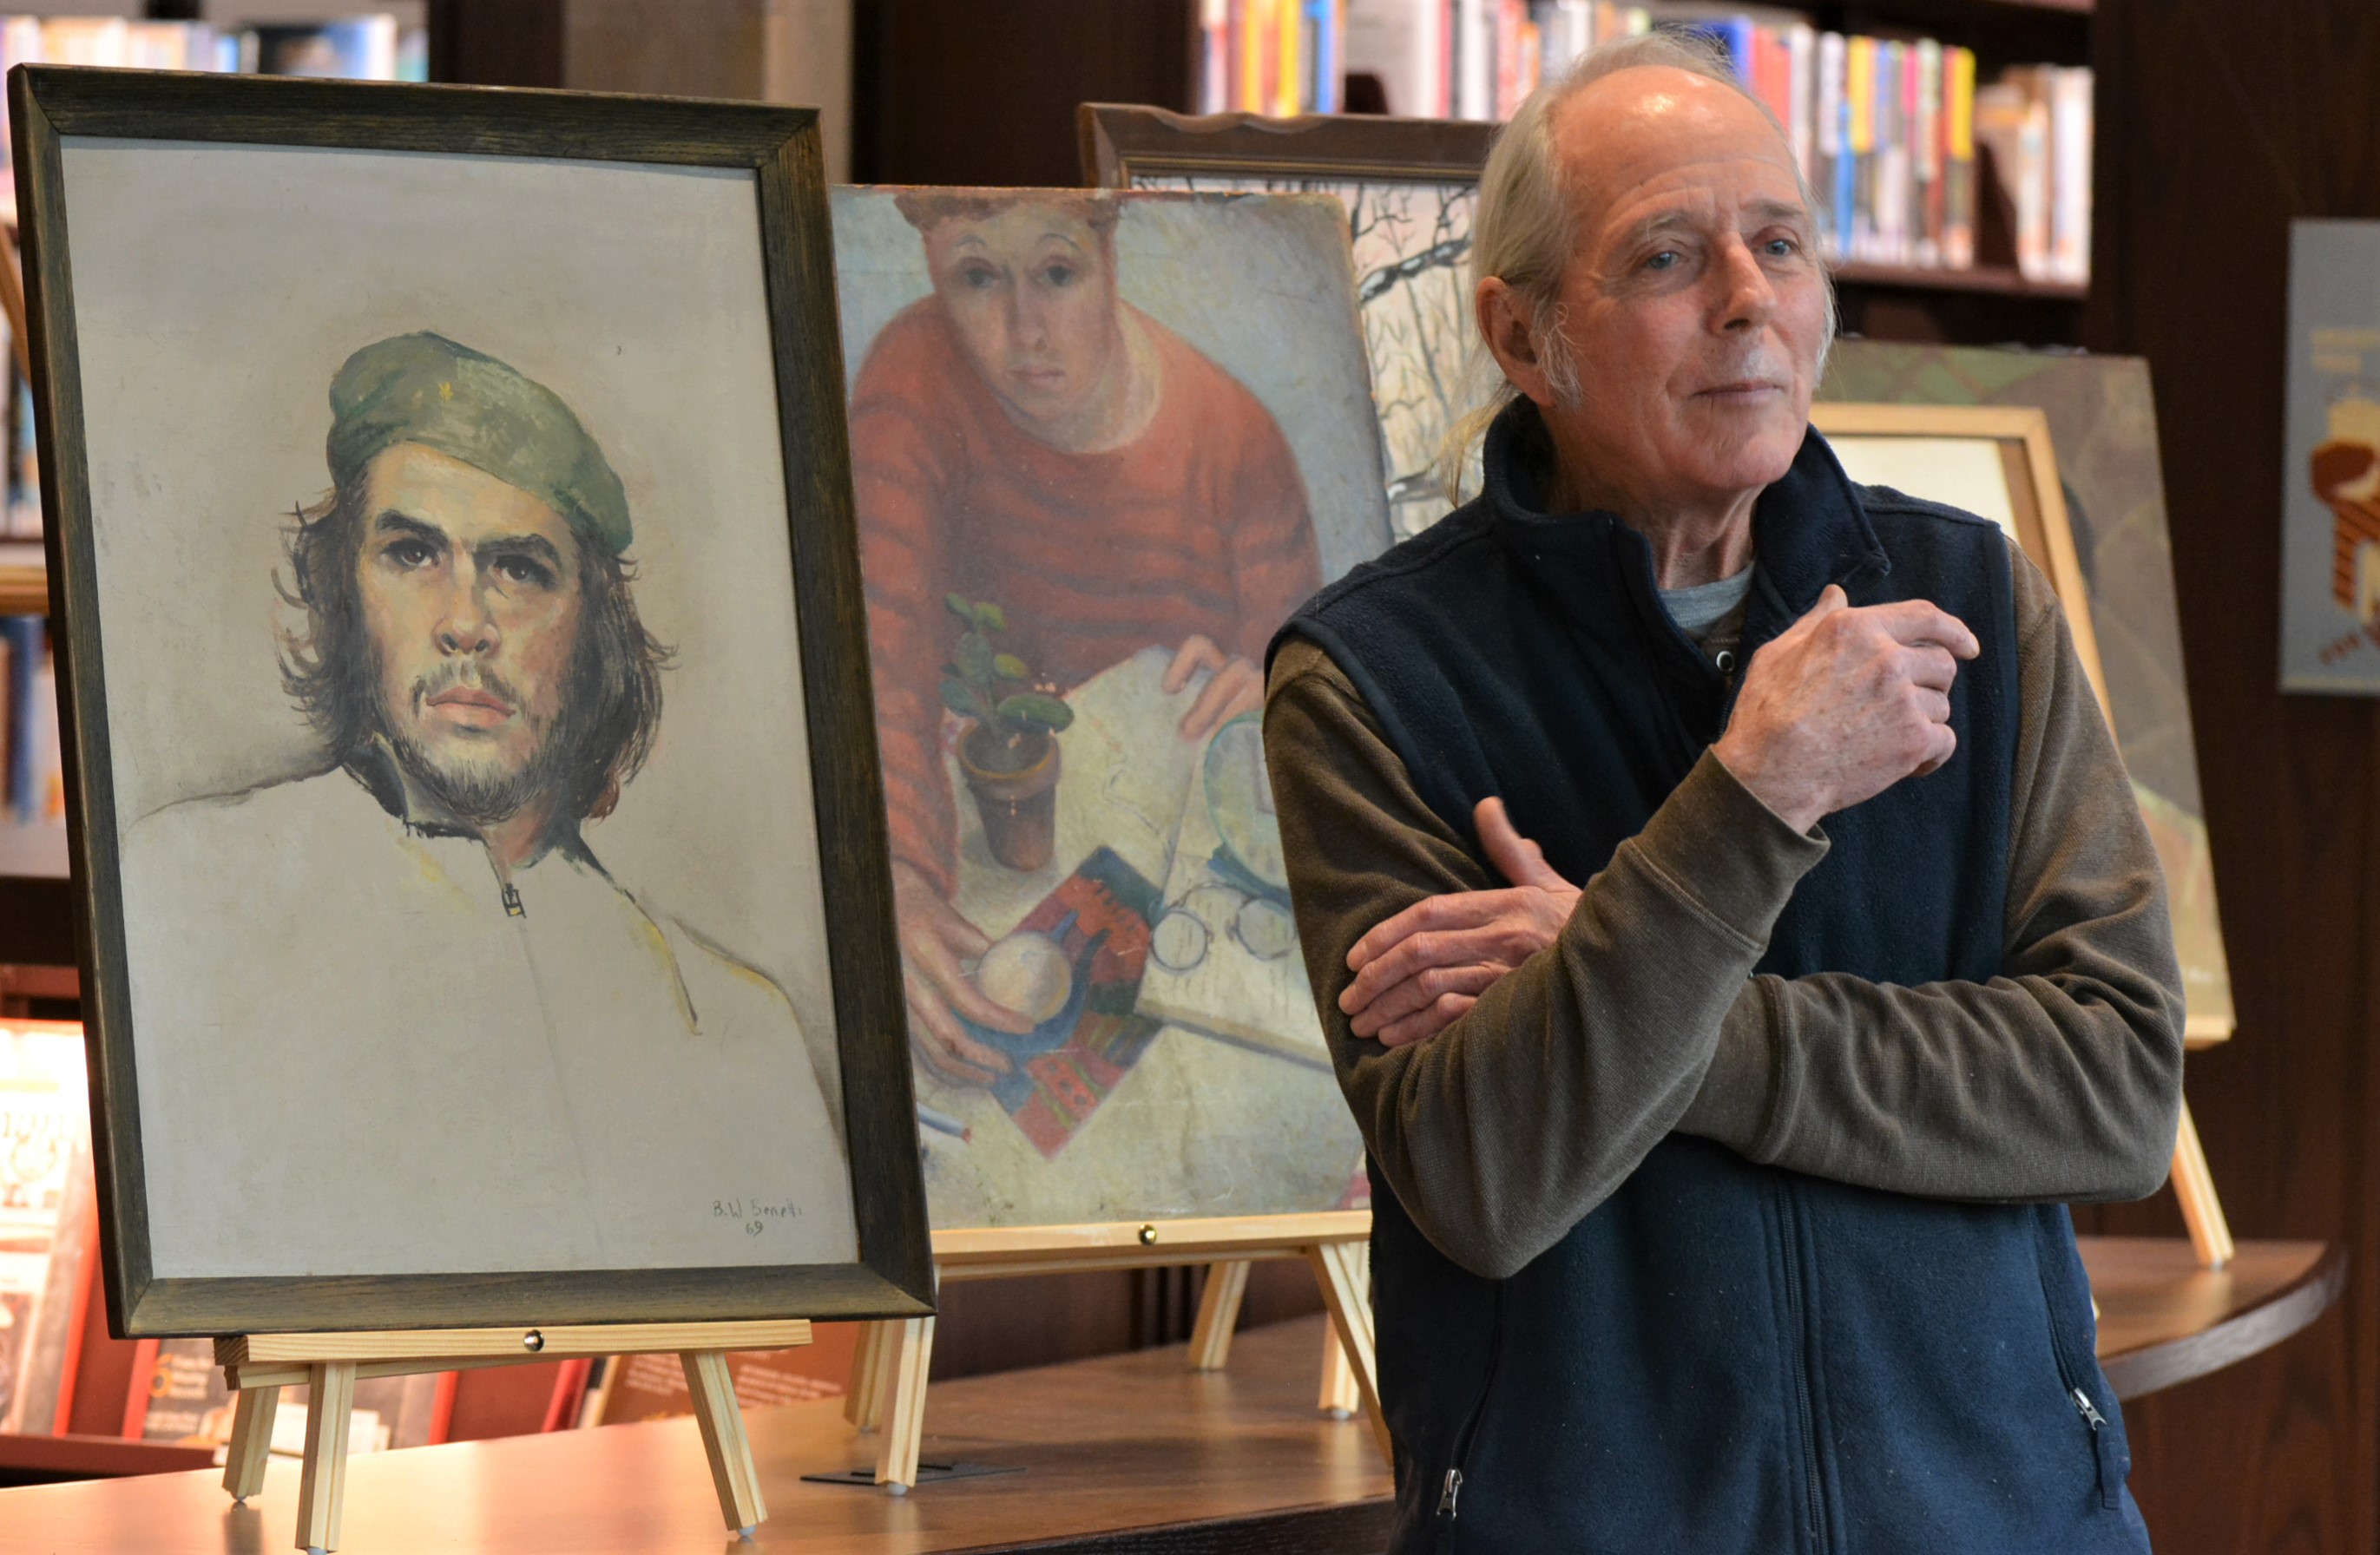 Tony Benetti told stories about his mother, Barbara Willson Benetti, a locally renowned artist,